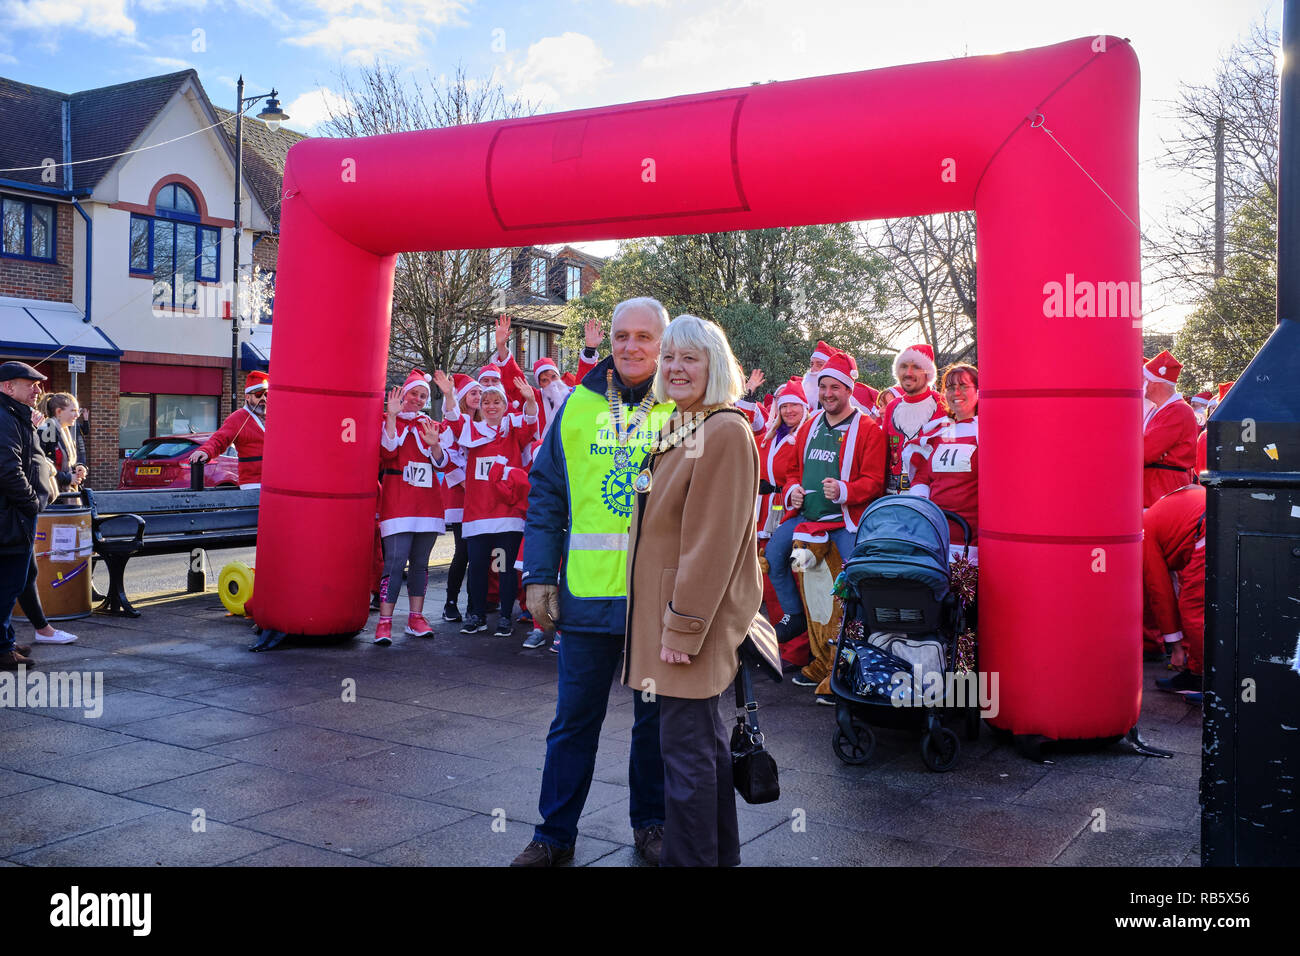 The participants dressed as Santa Claus taking part in the Great Thatcham Santa Fun Run waiting at the start for the event to begin, Thatcham, UK Stock Photo